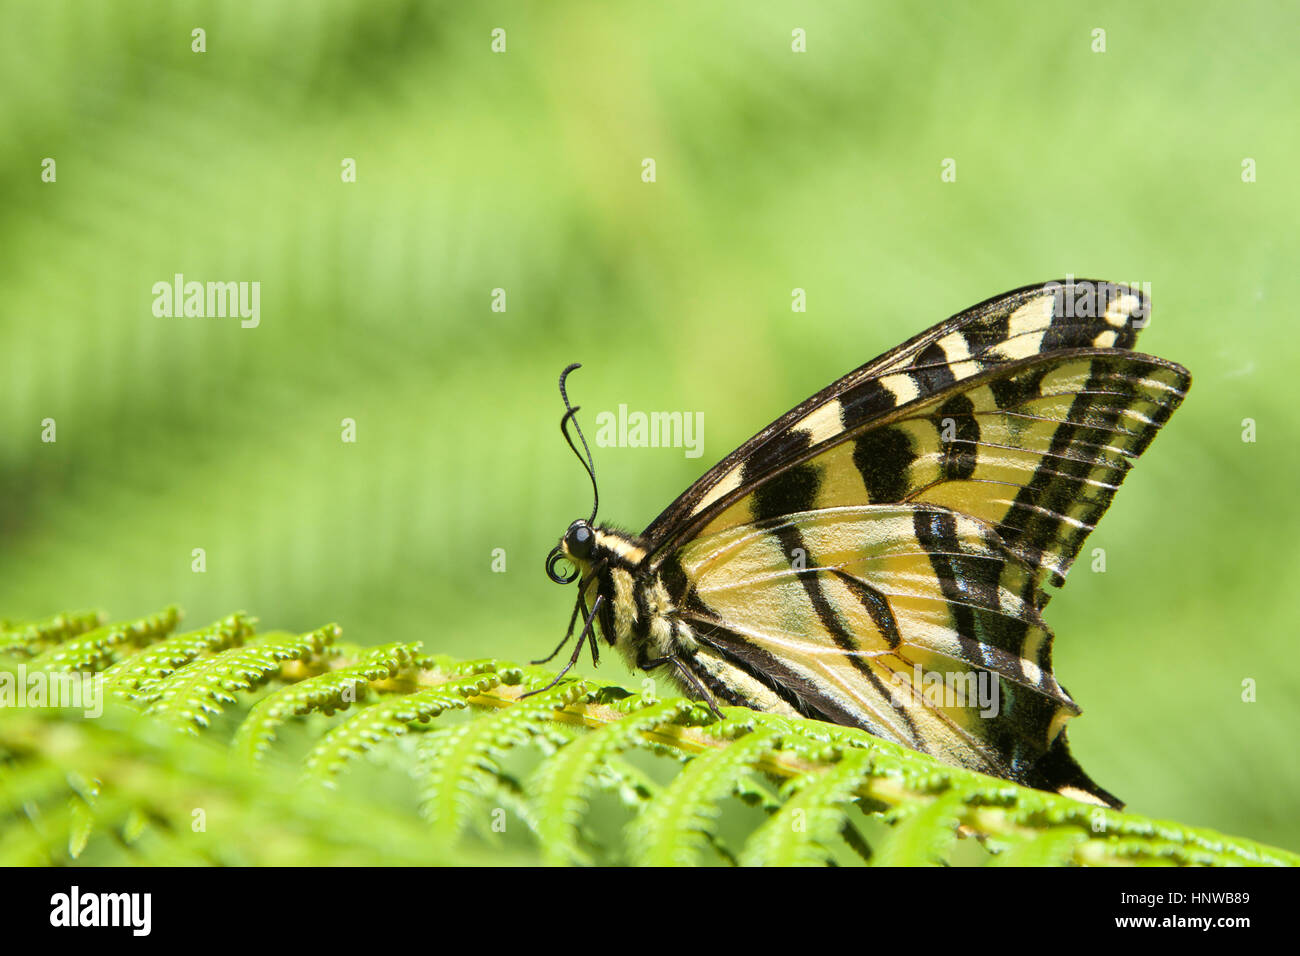 Western Tiger Swallowtail, also known as the American Swallowtail or Parsnip Swallowtail resting on a fern Stock Photo